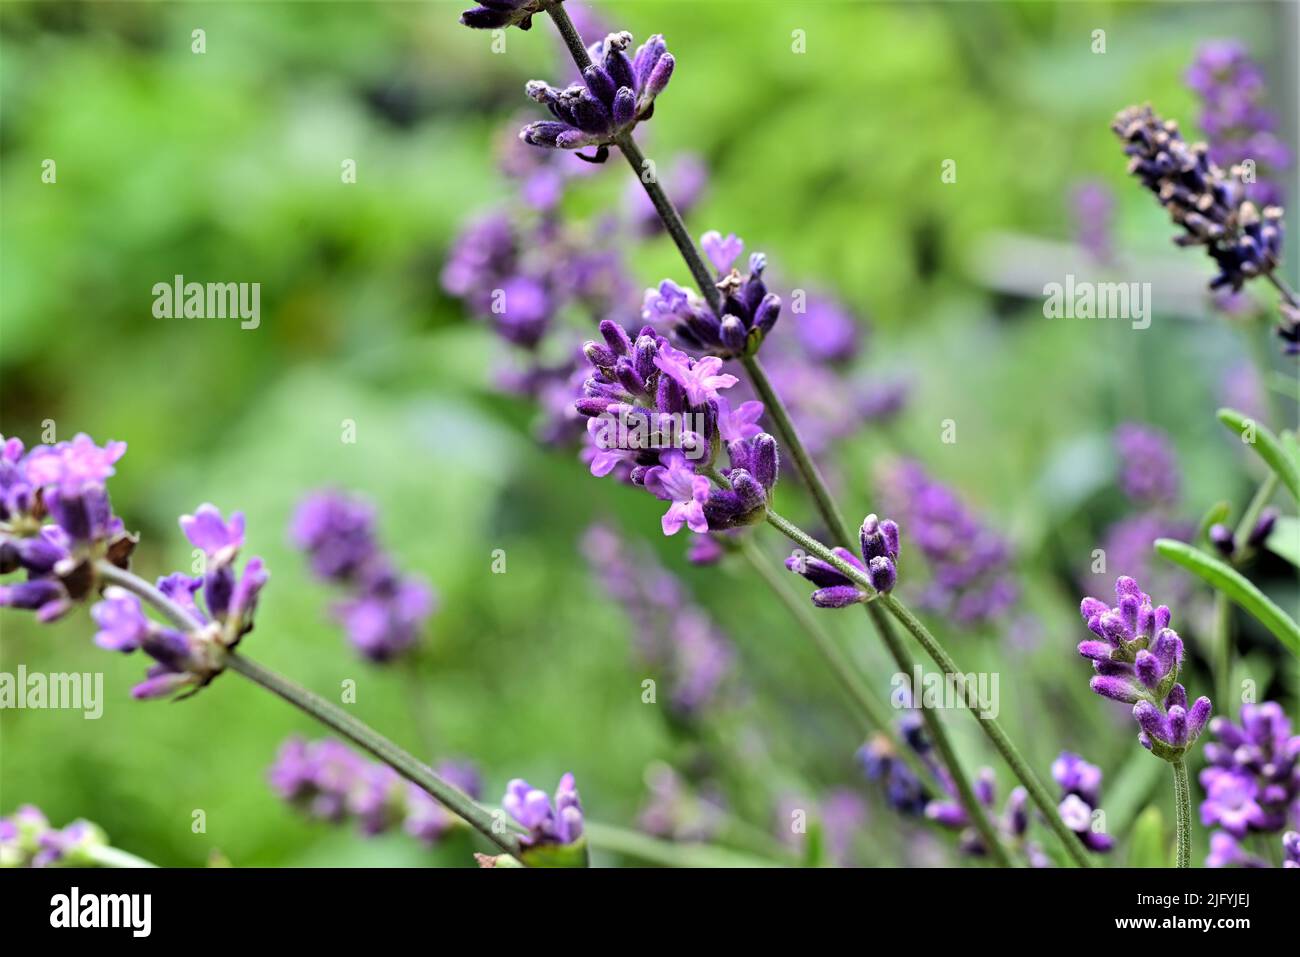 Flowering lavender against a blurred green background Stock Photo